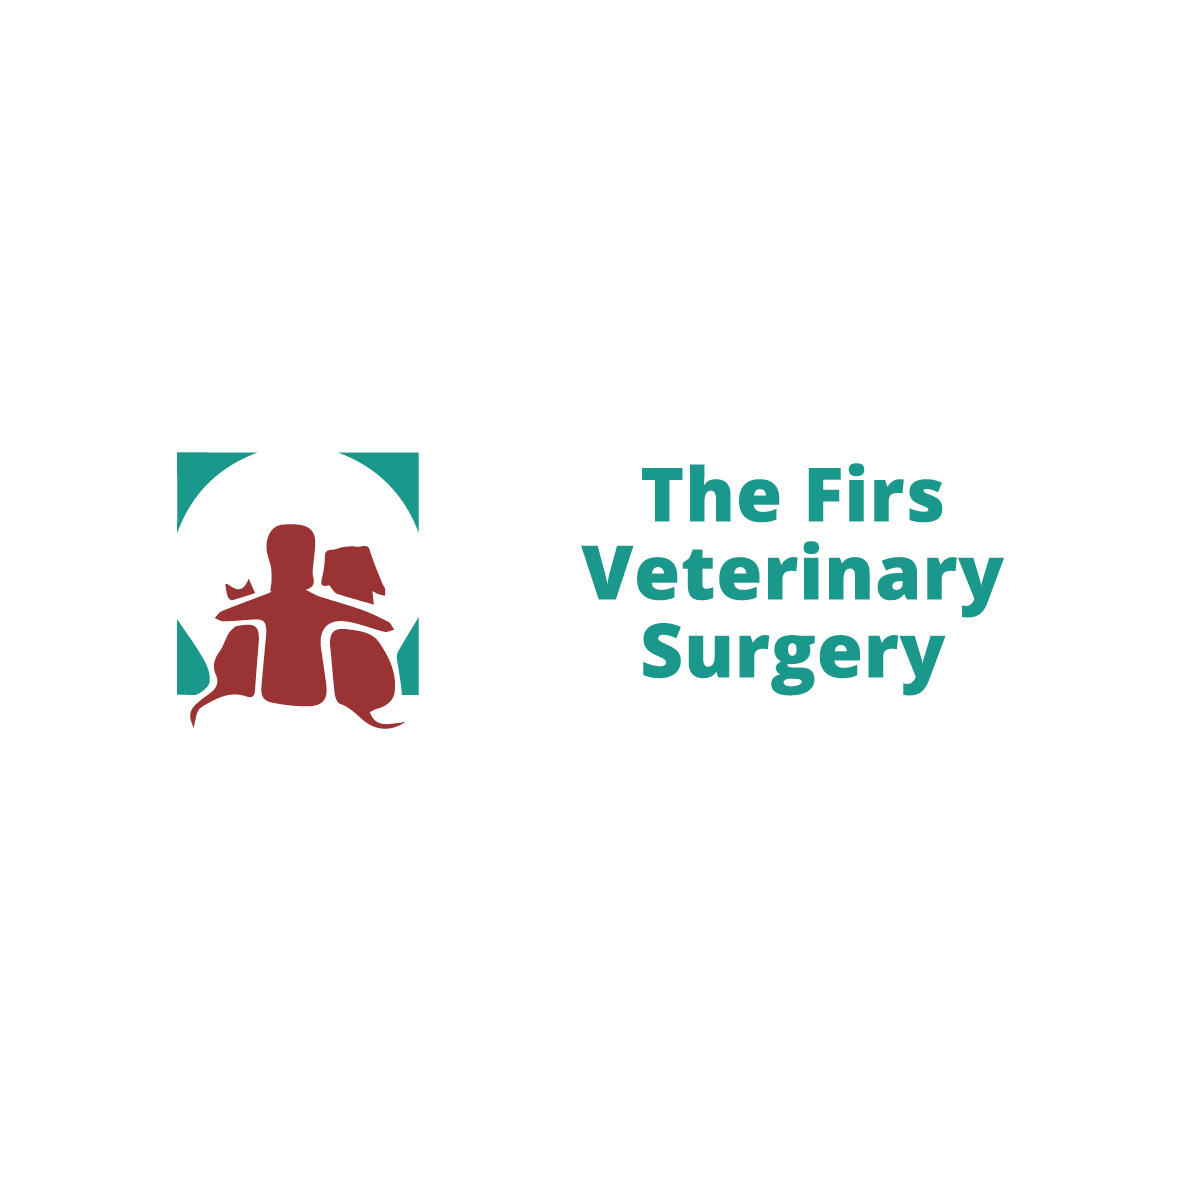 Willows Veterinary Group - The Firs Veterinary Surgery - Kelsall, Cheshire CW6 0QG - 01829 751500 | ShowMeLocal.com